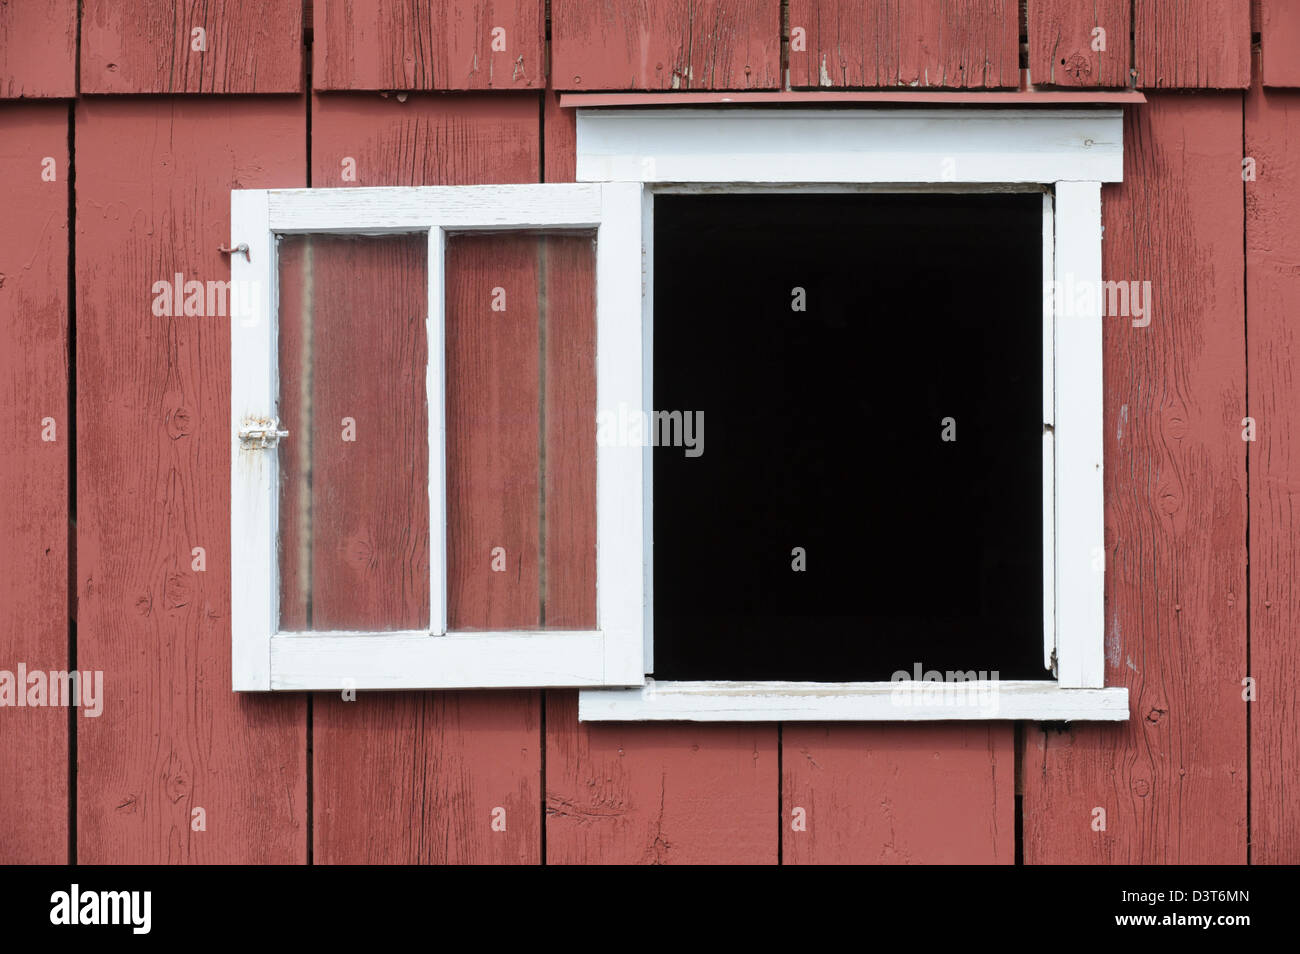 Open window in red barn with white trim as a design element, place your own image in the opening. Stock Photo